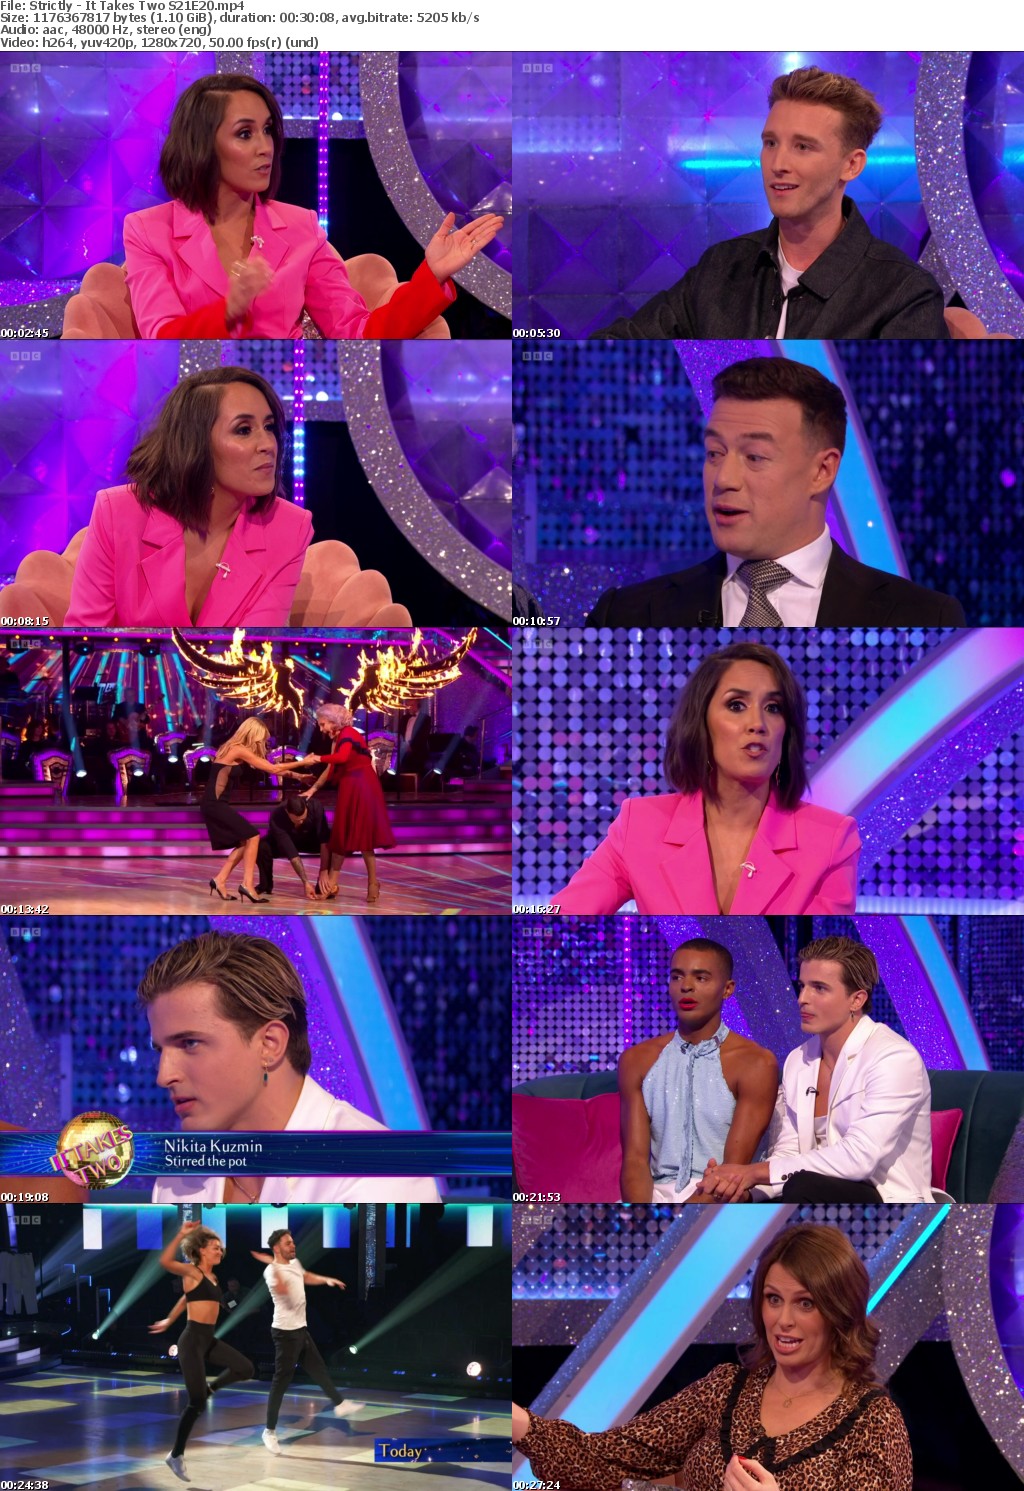 Strictly - It Takes Two S21E20 (1280x720p HD, 50fps, soft Eng subs)